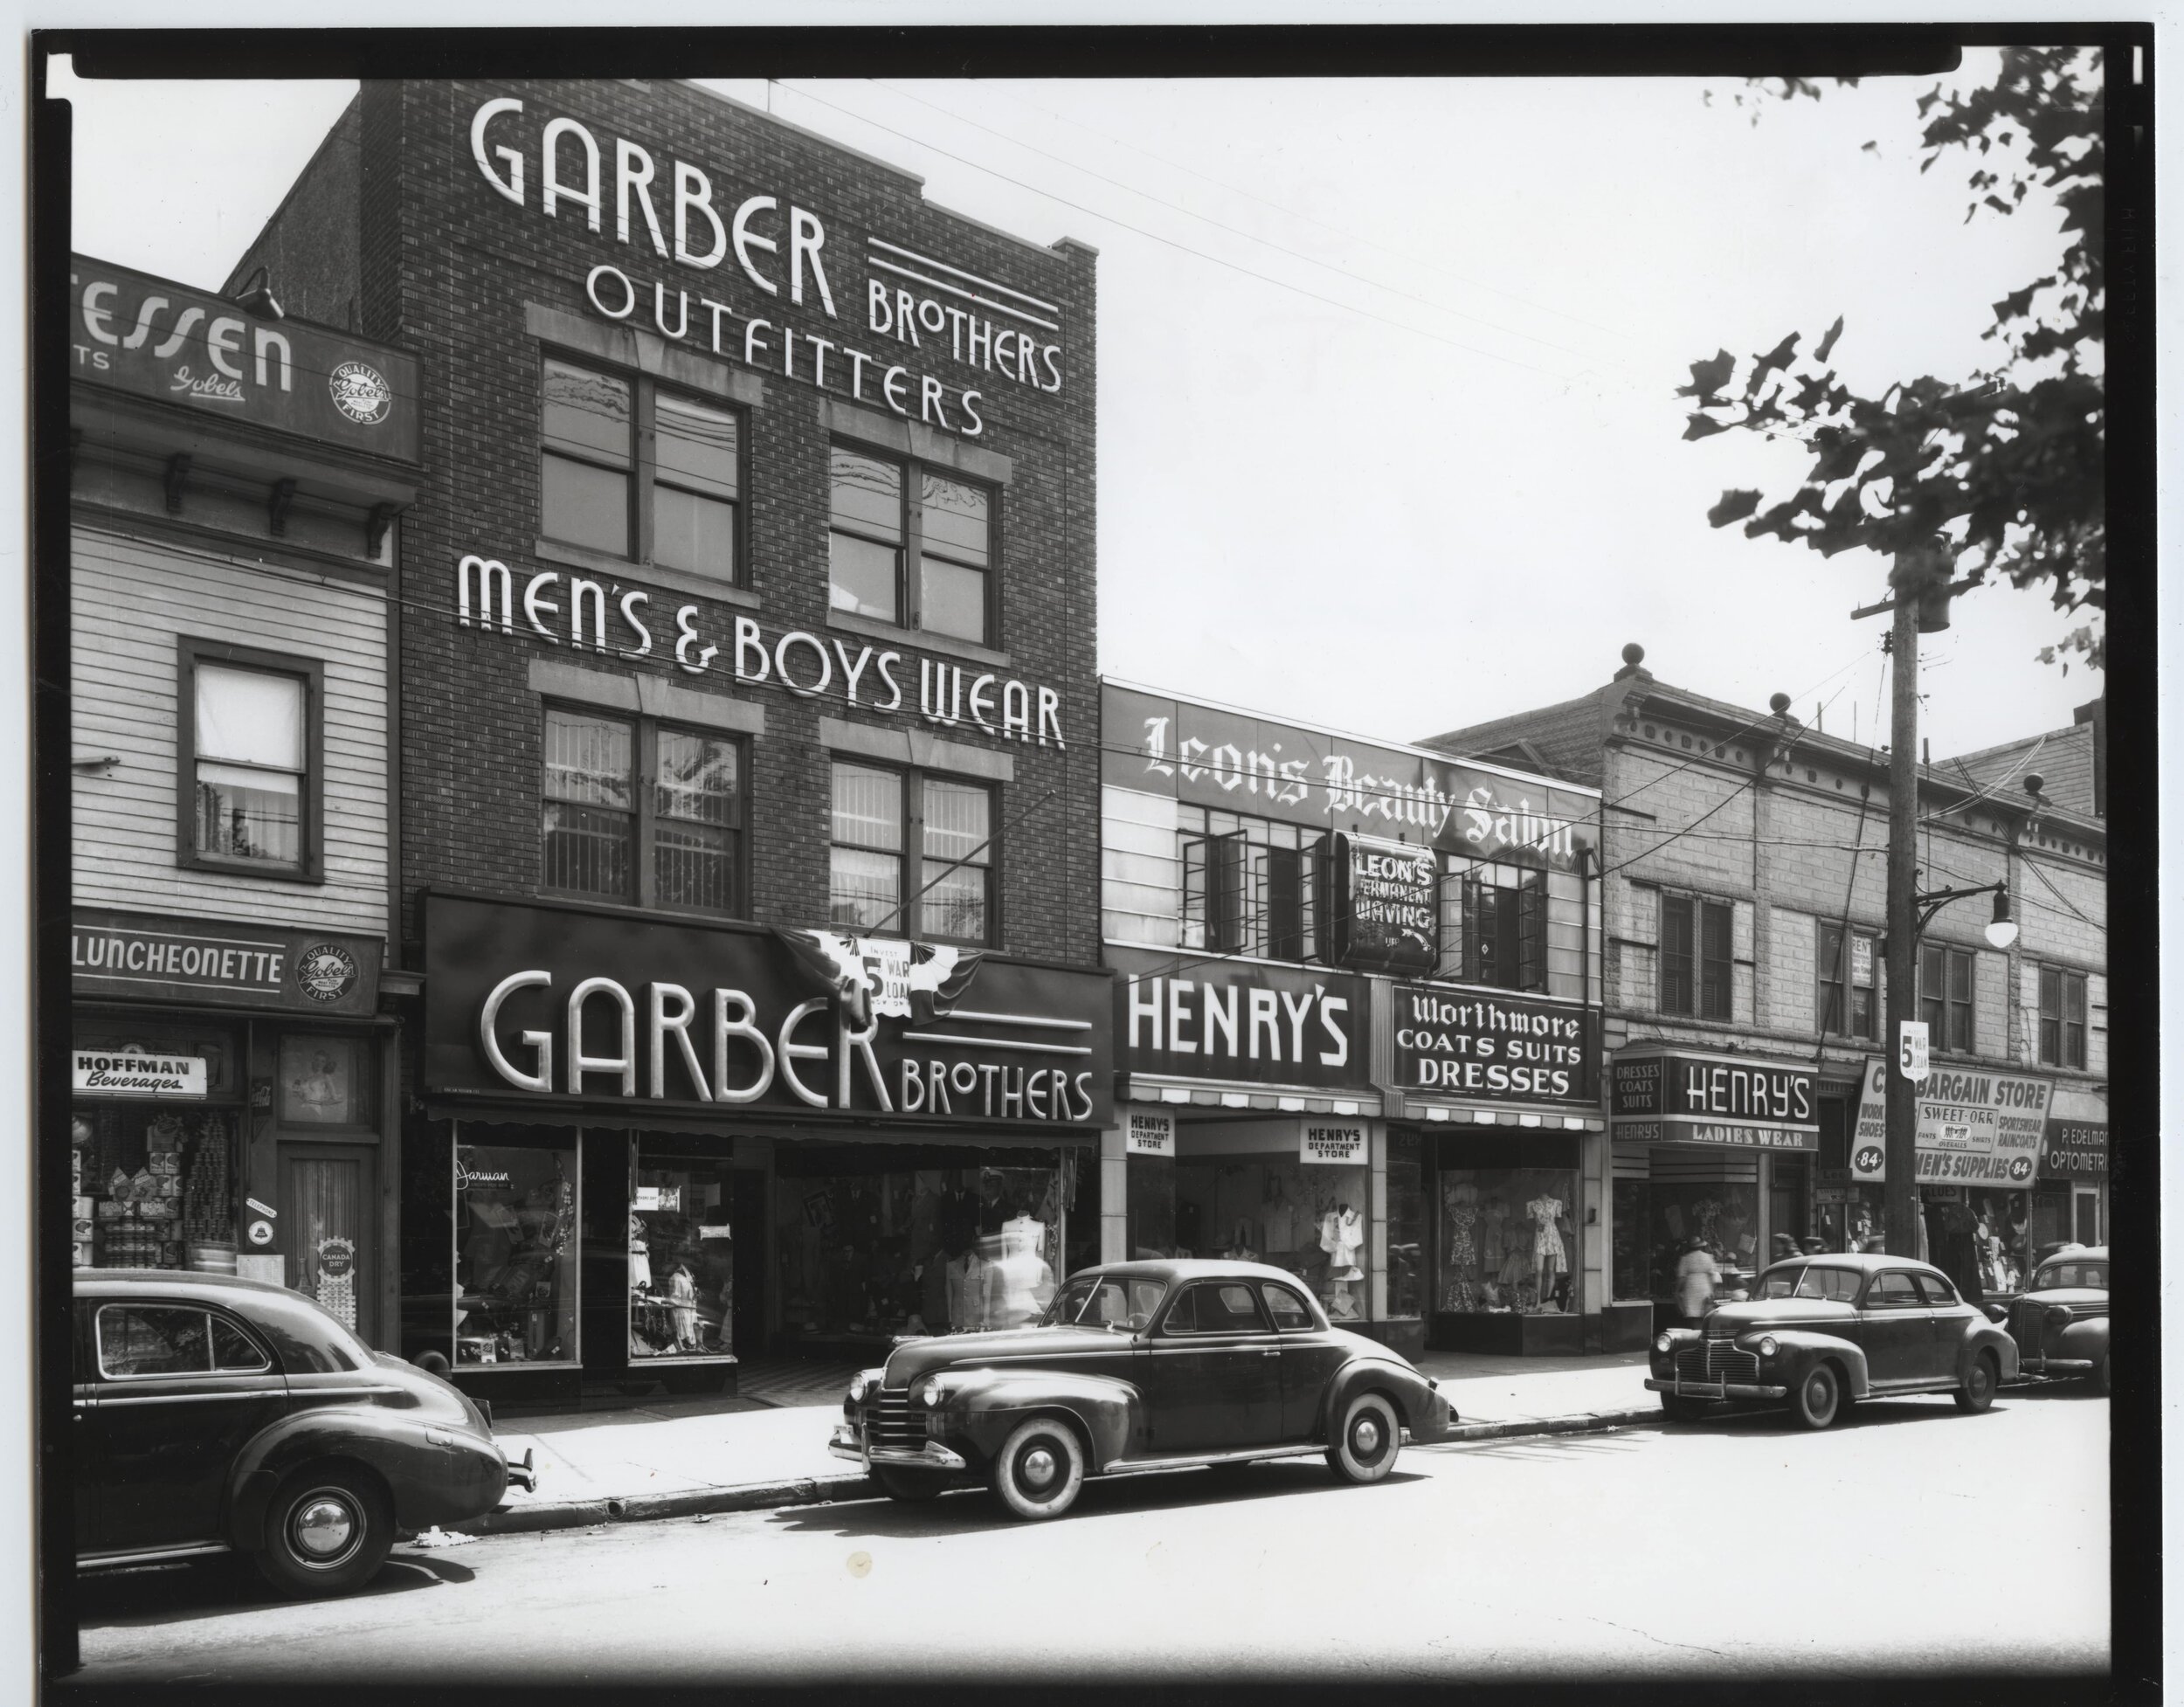 Garber Brothers store on Canal Street, photo by Herbert A. Flamm, ca. 1946 (Copy)